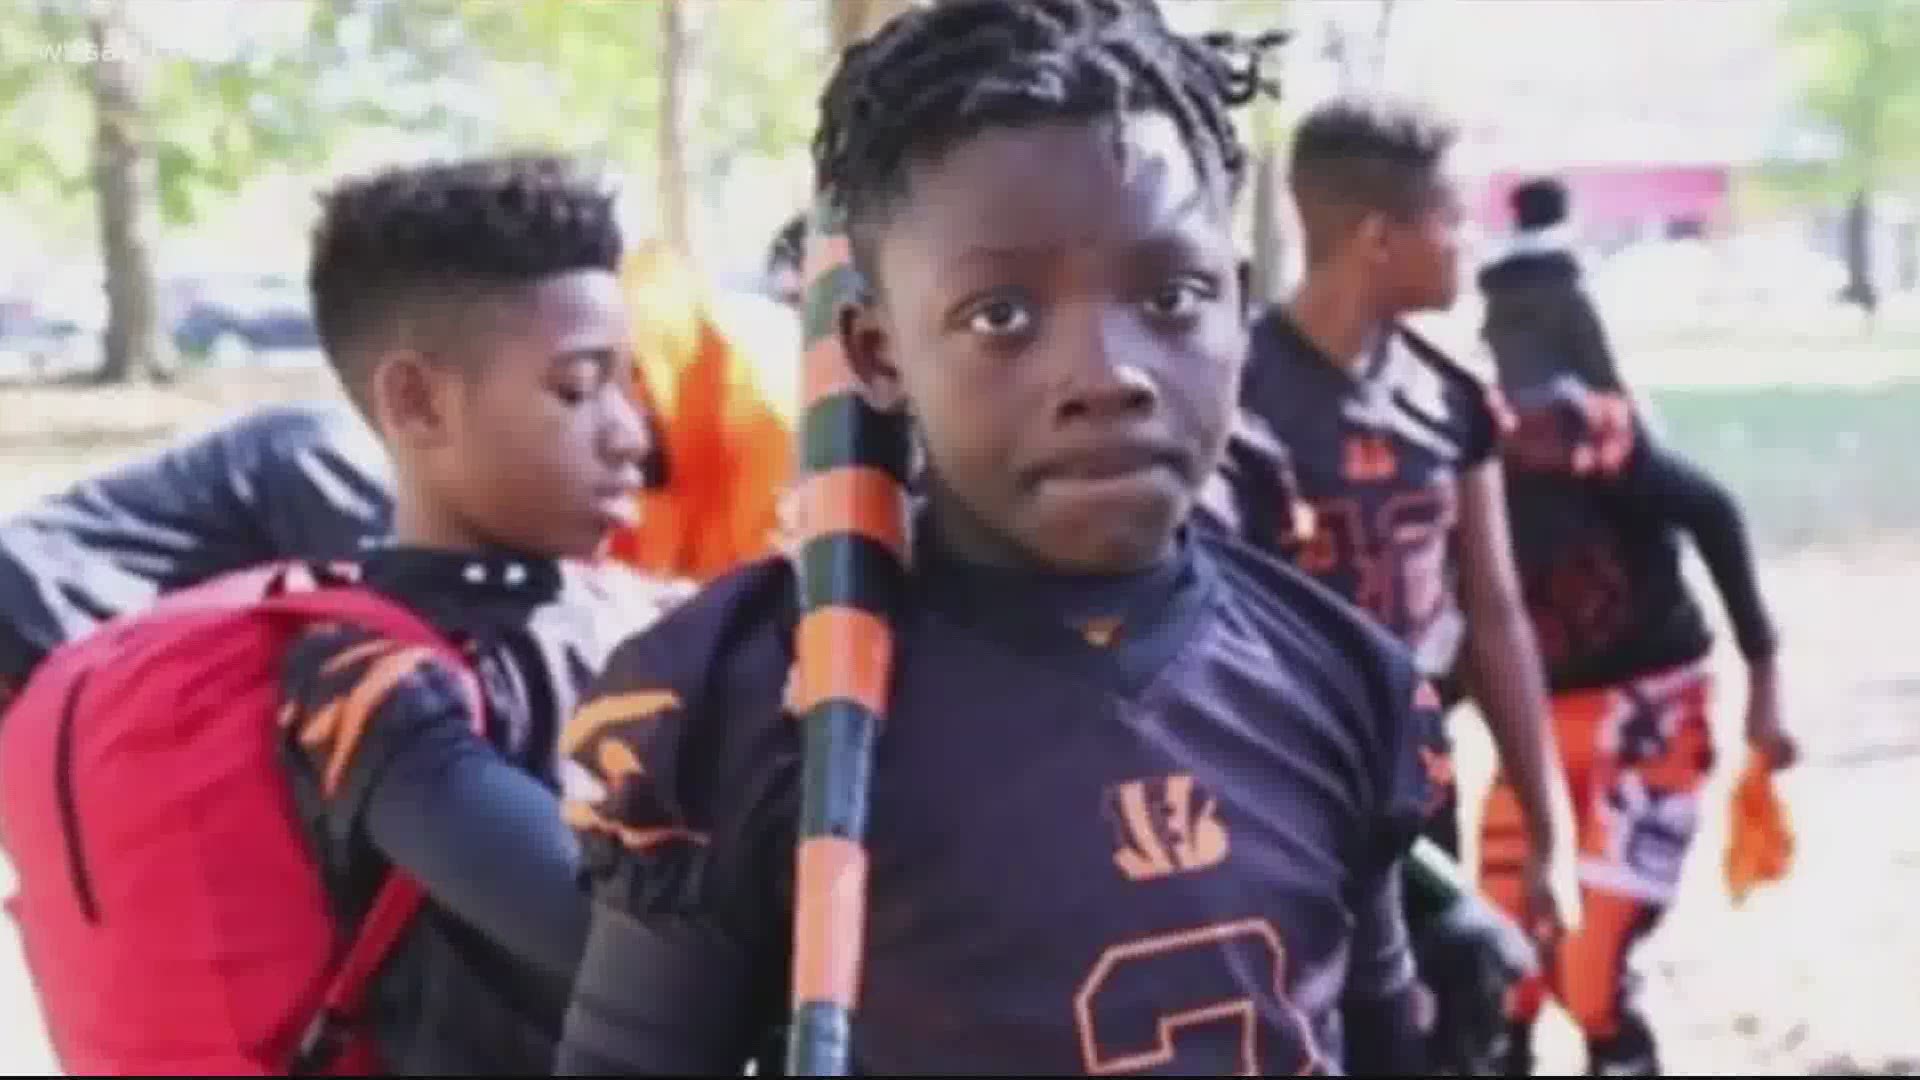 The group marched more than six miles from the football field where the 11-year-old played to the spot he was killed one week ago.